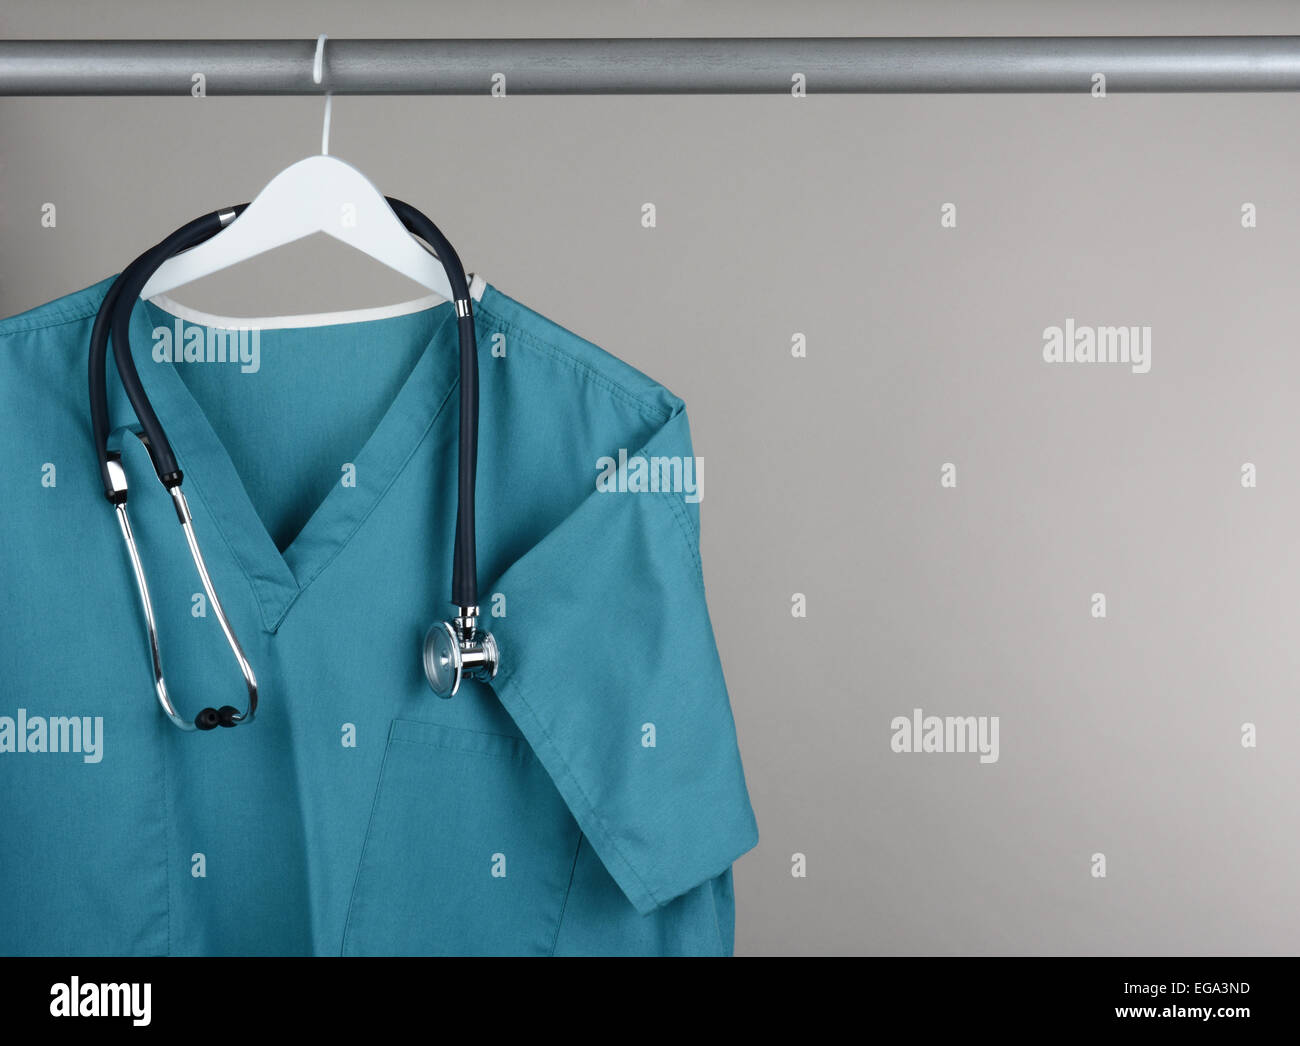 Closeup of a doctor's scrubs and stethoscope on hanger against a neutral background. Green surgical smock on a white hanger with Stock Photo